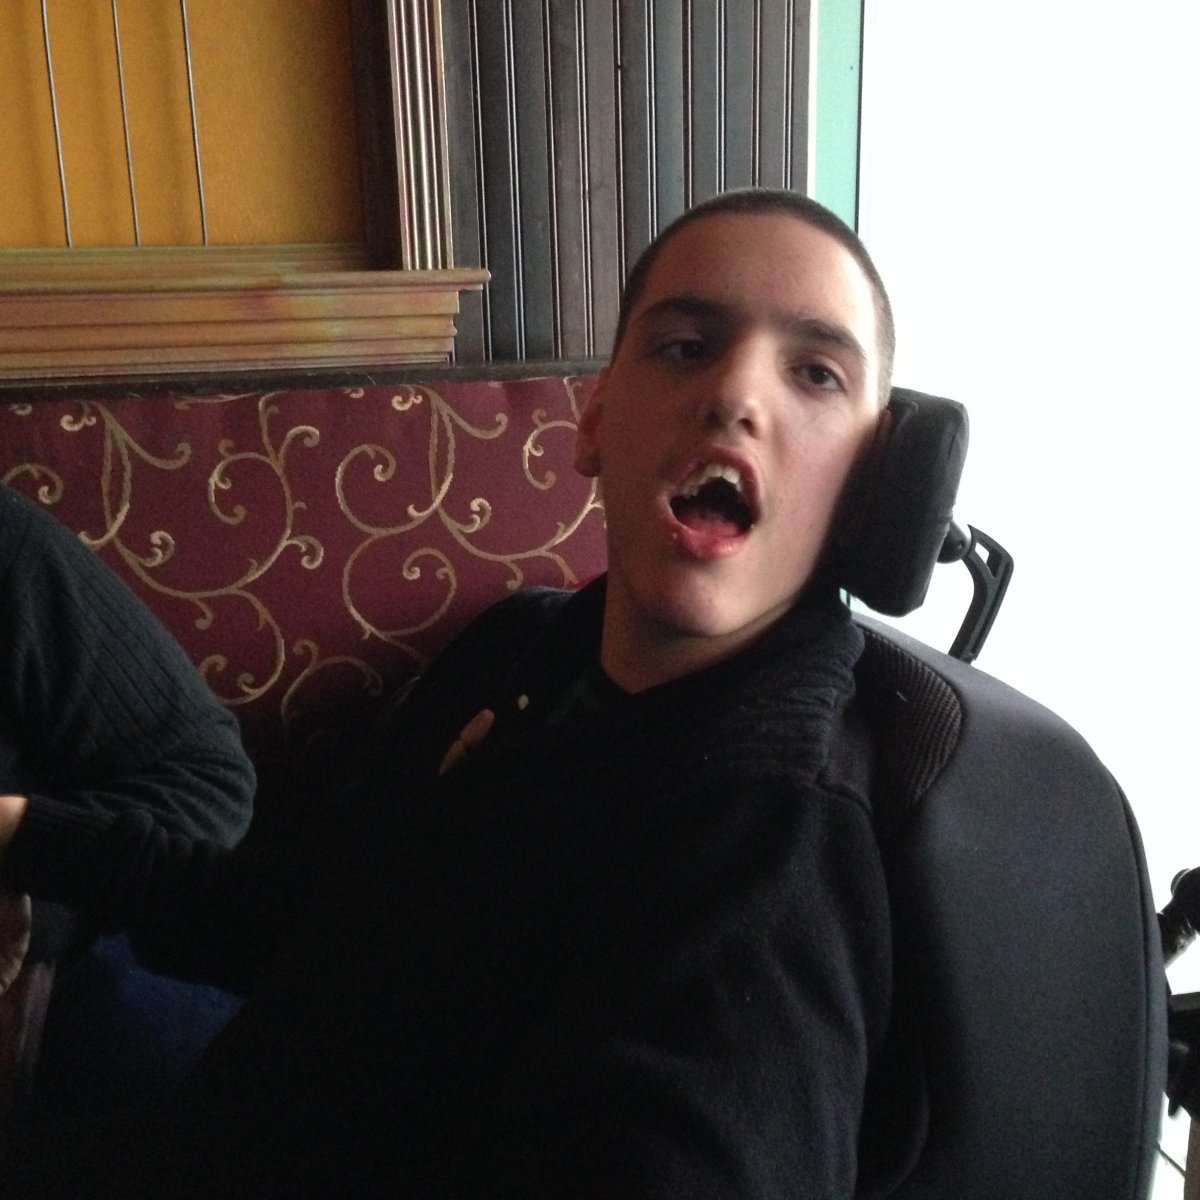 Noah Isenor has cerebral palsy and needs thousands of dollars of specialized equipment.